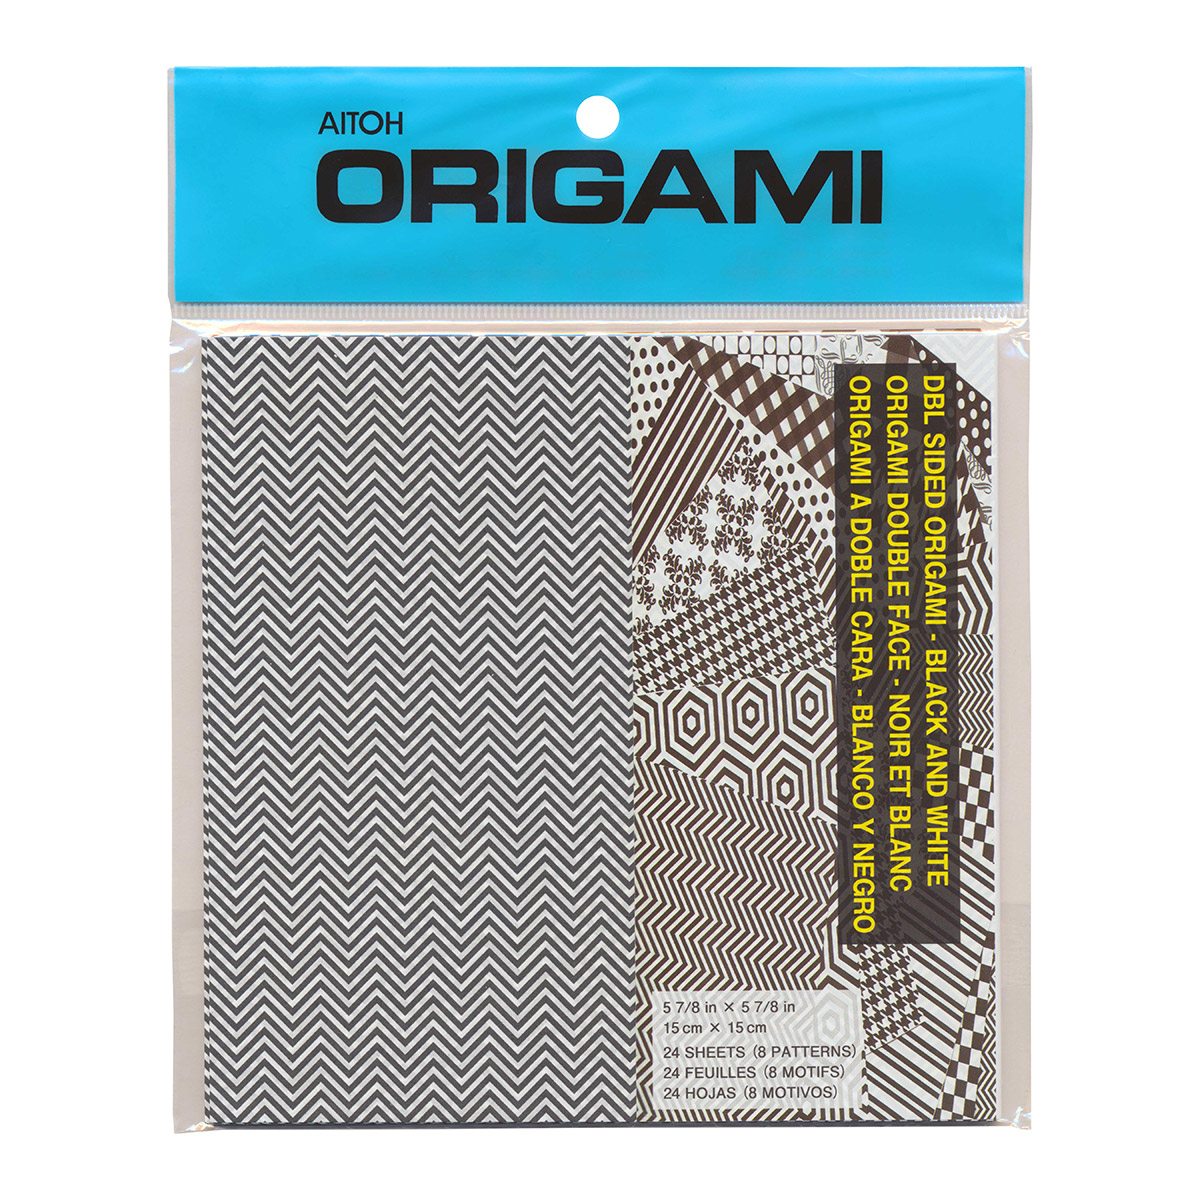 Aitoh Origami Paper Aitoh 5 78 Blackwhite Pattern Double Sided Origami Paper 24 Sheet